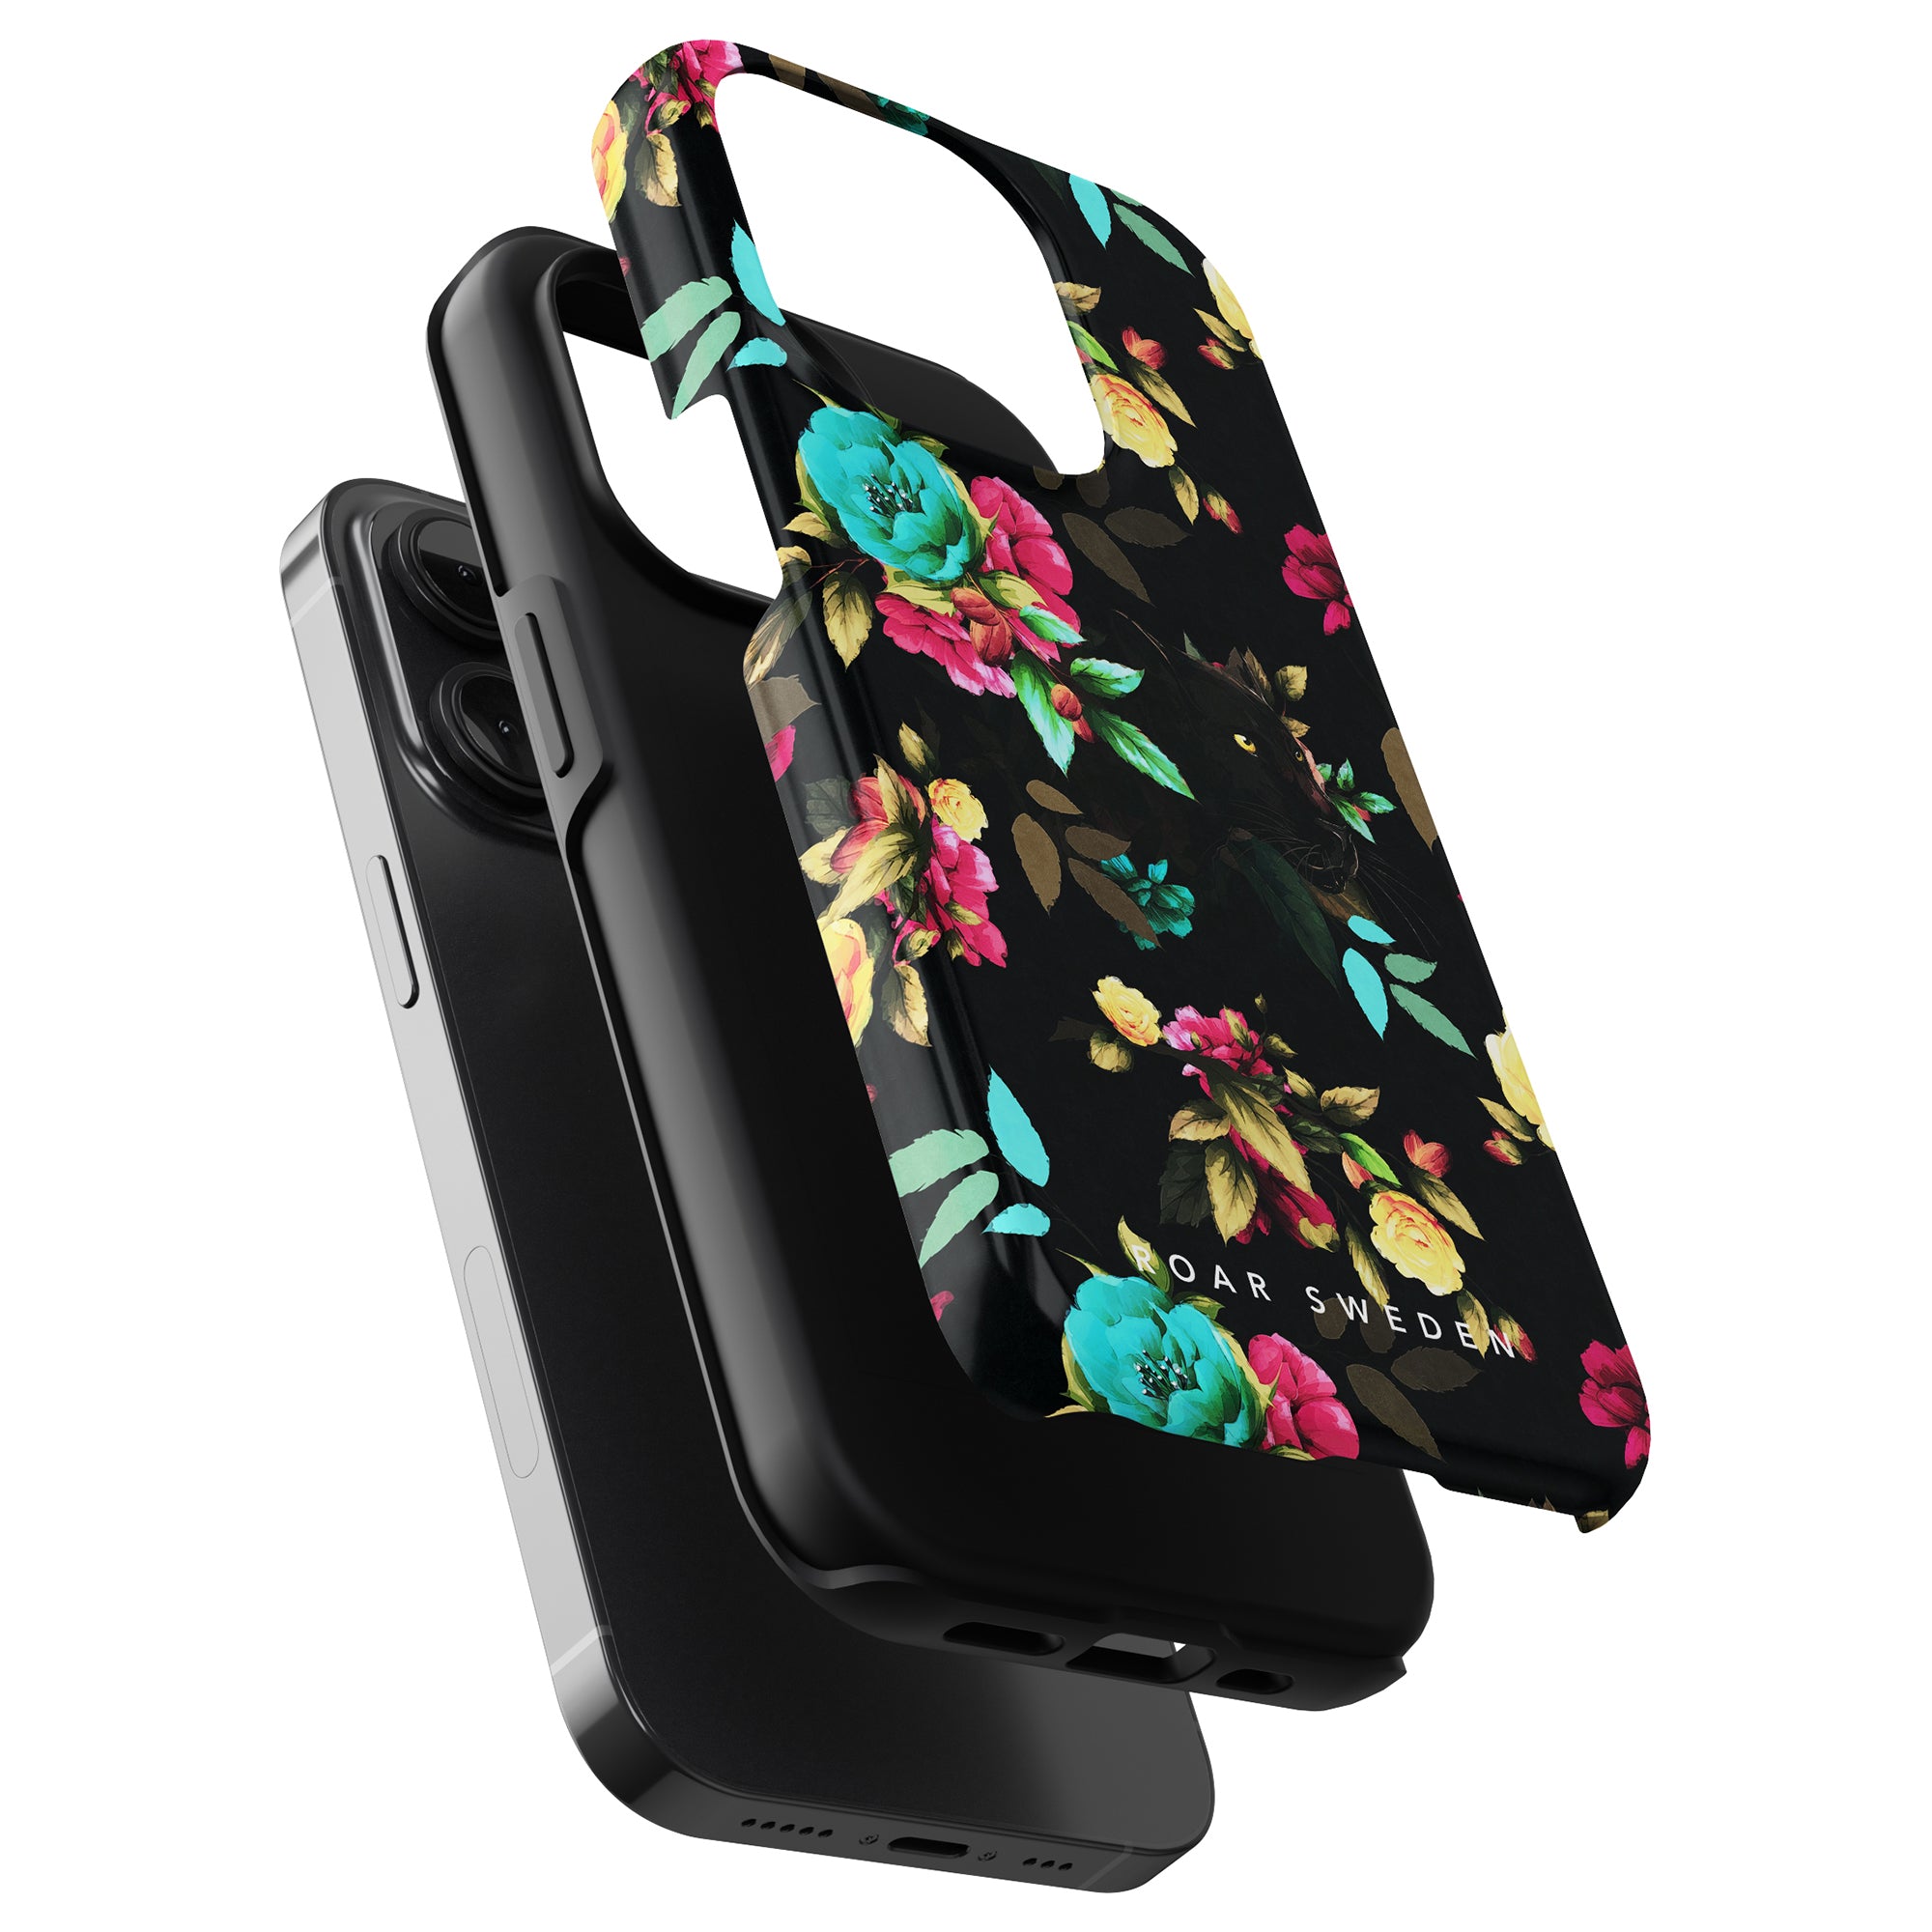 Black smartphone with a Bloom Panther - Tough Case attached, featuring a built-in handle for easy carrying. The case is adorned with colorful flowers on a dark background.